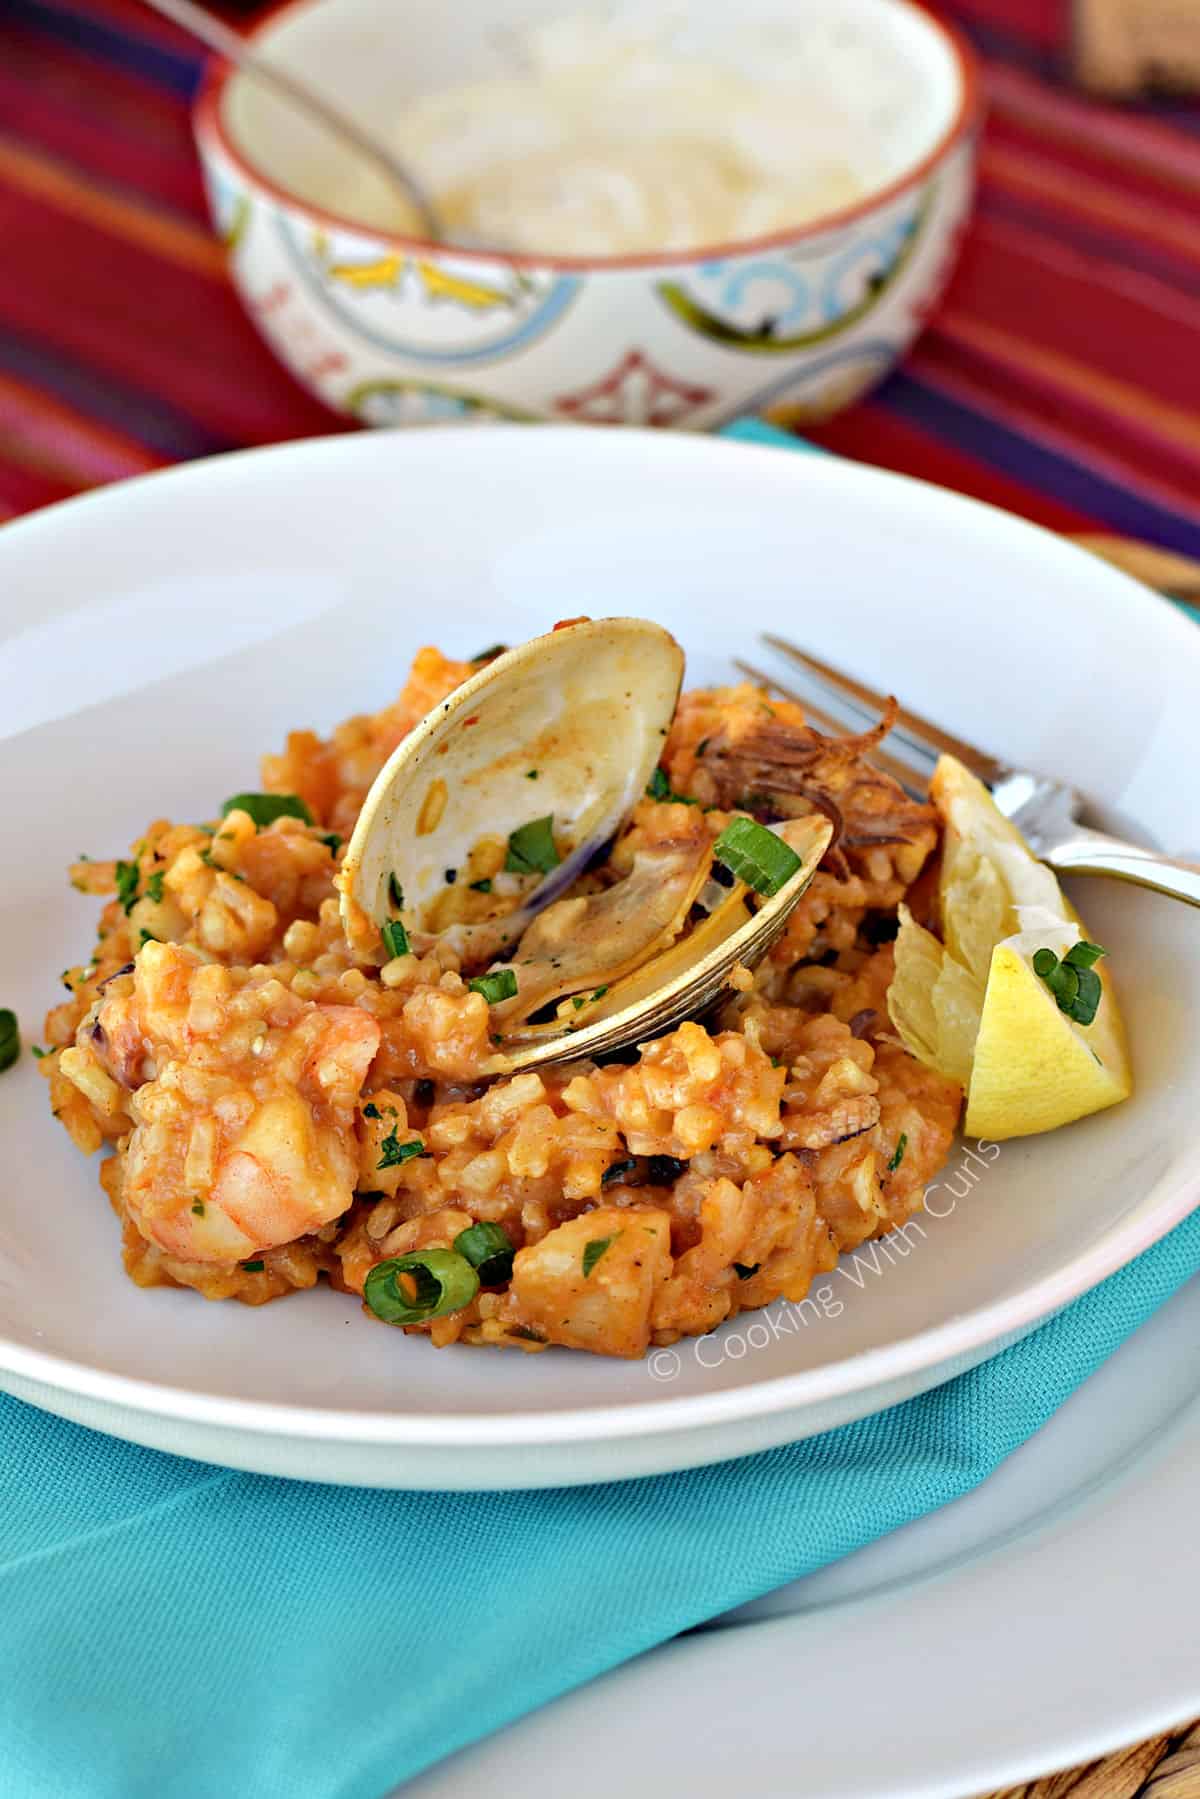 A serving of Seafood Paella with an open clam and baby octopus on a small plate with a lemon wedge on the side.